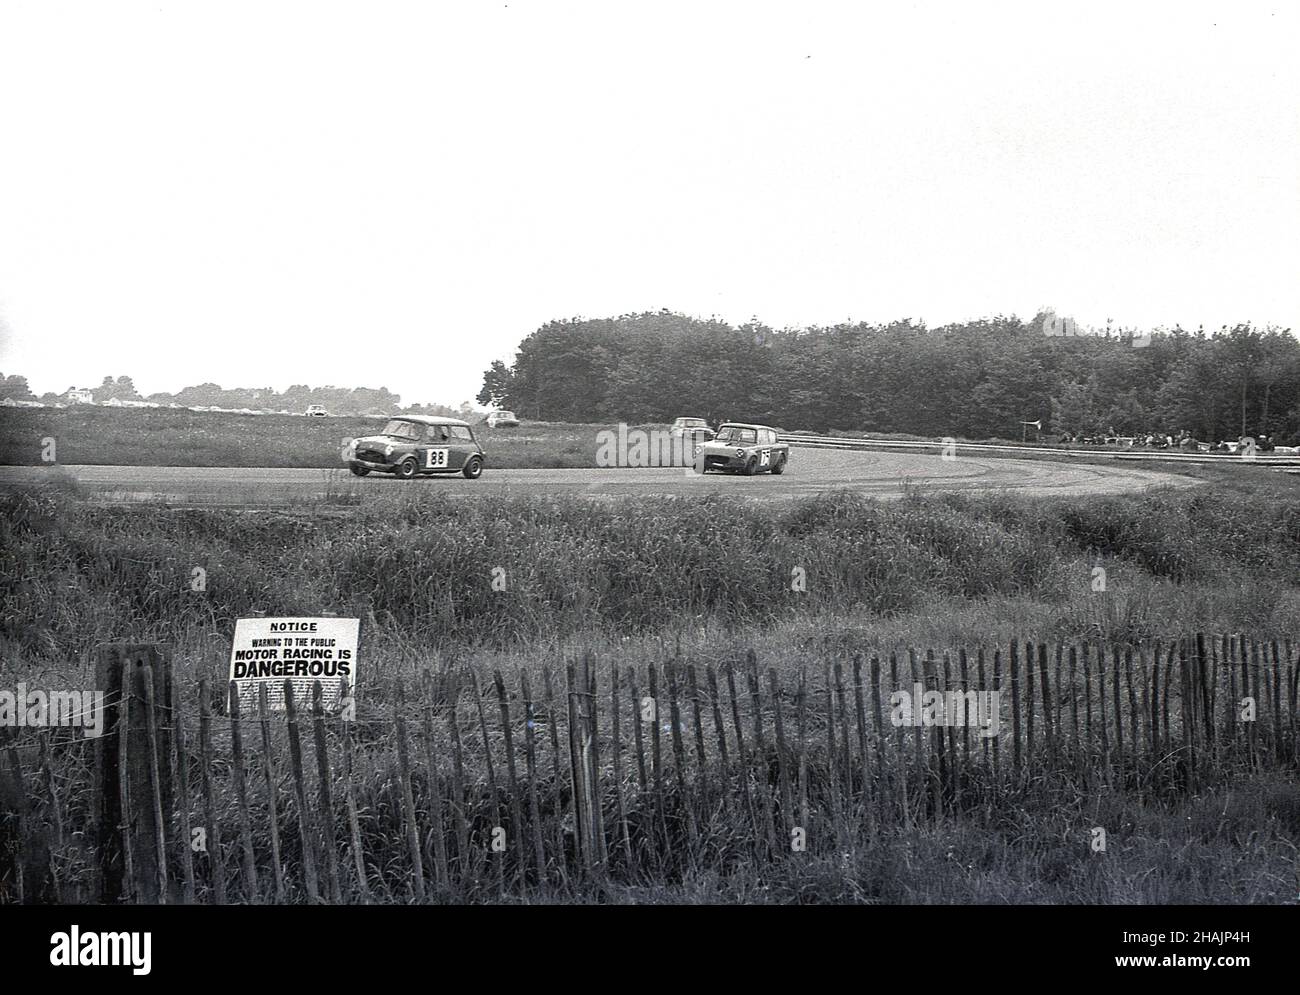 1960s, historical, motor sport, cars racing, England, UK. Away from the track, a small warning notice on the grass by a short wooden fence says, Motor Racing is DANGEROUS. Stock Photo